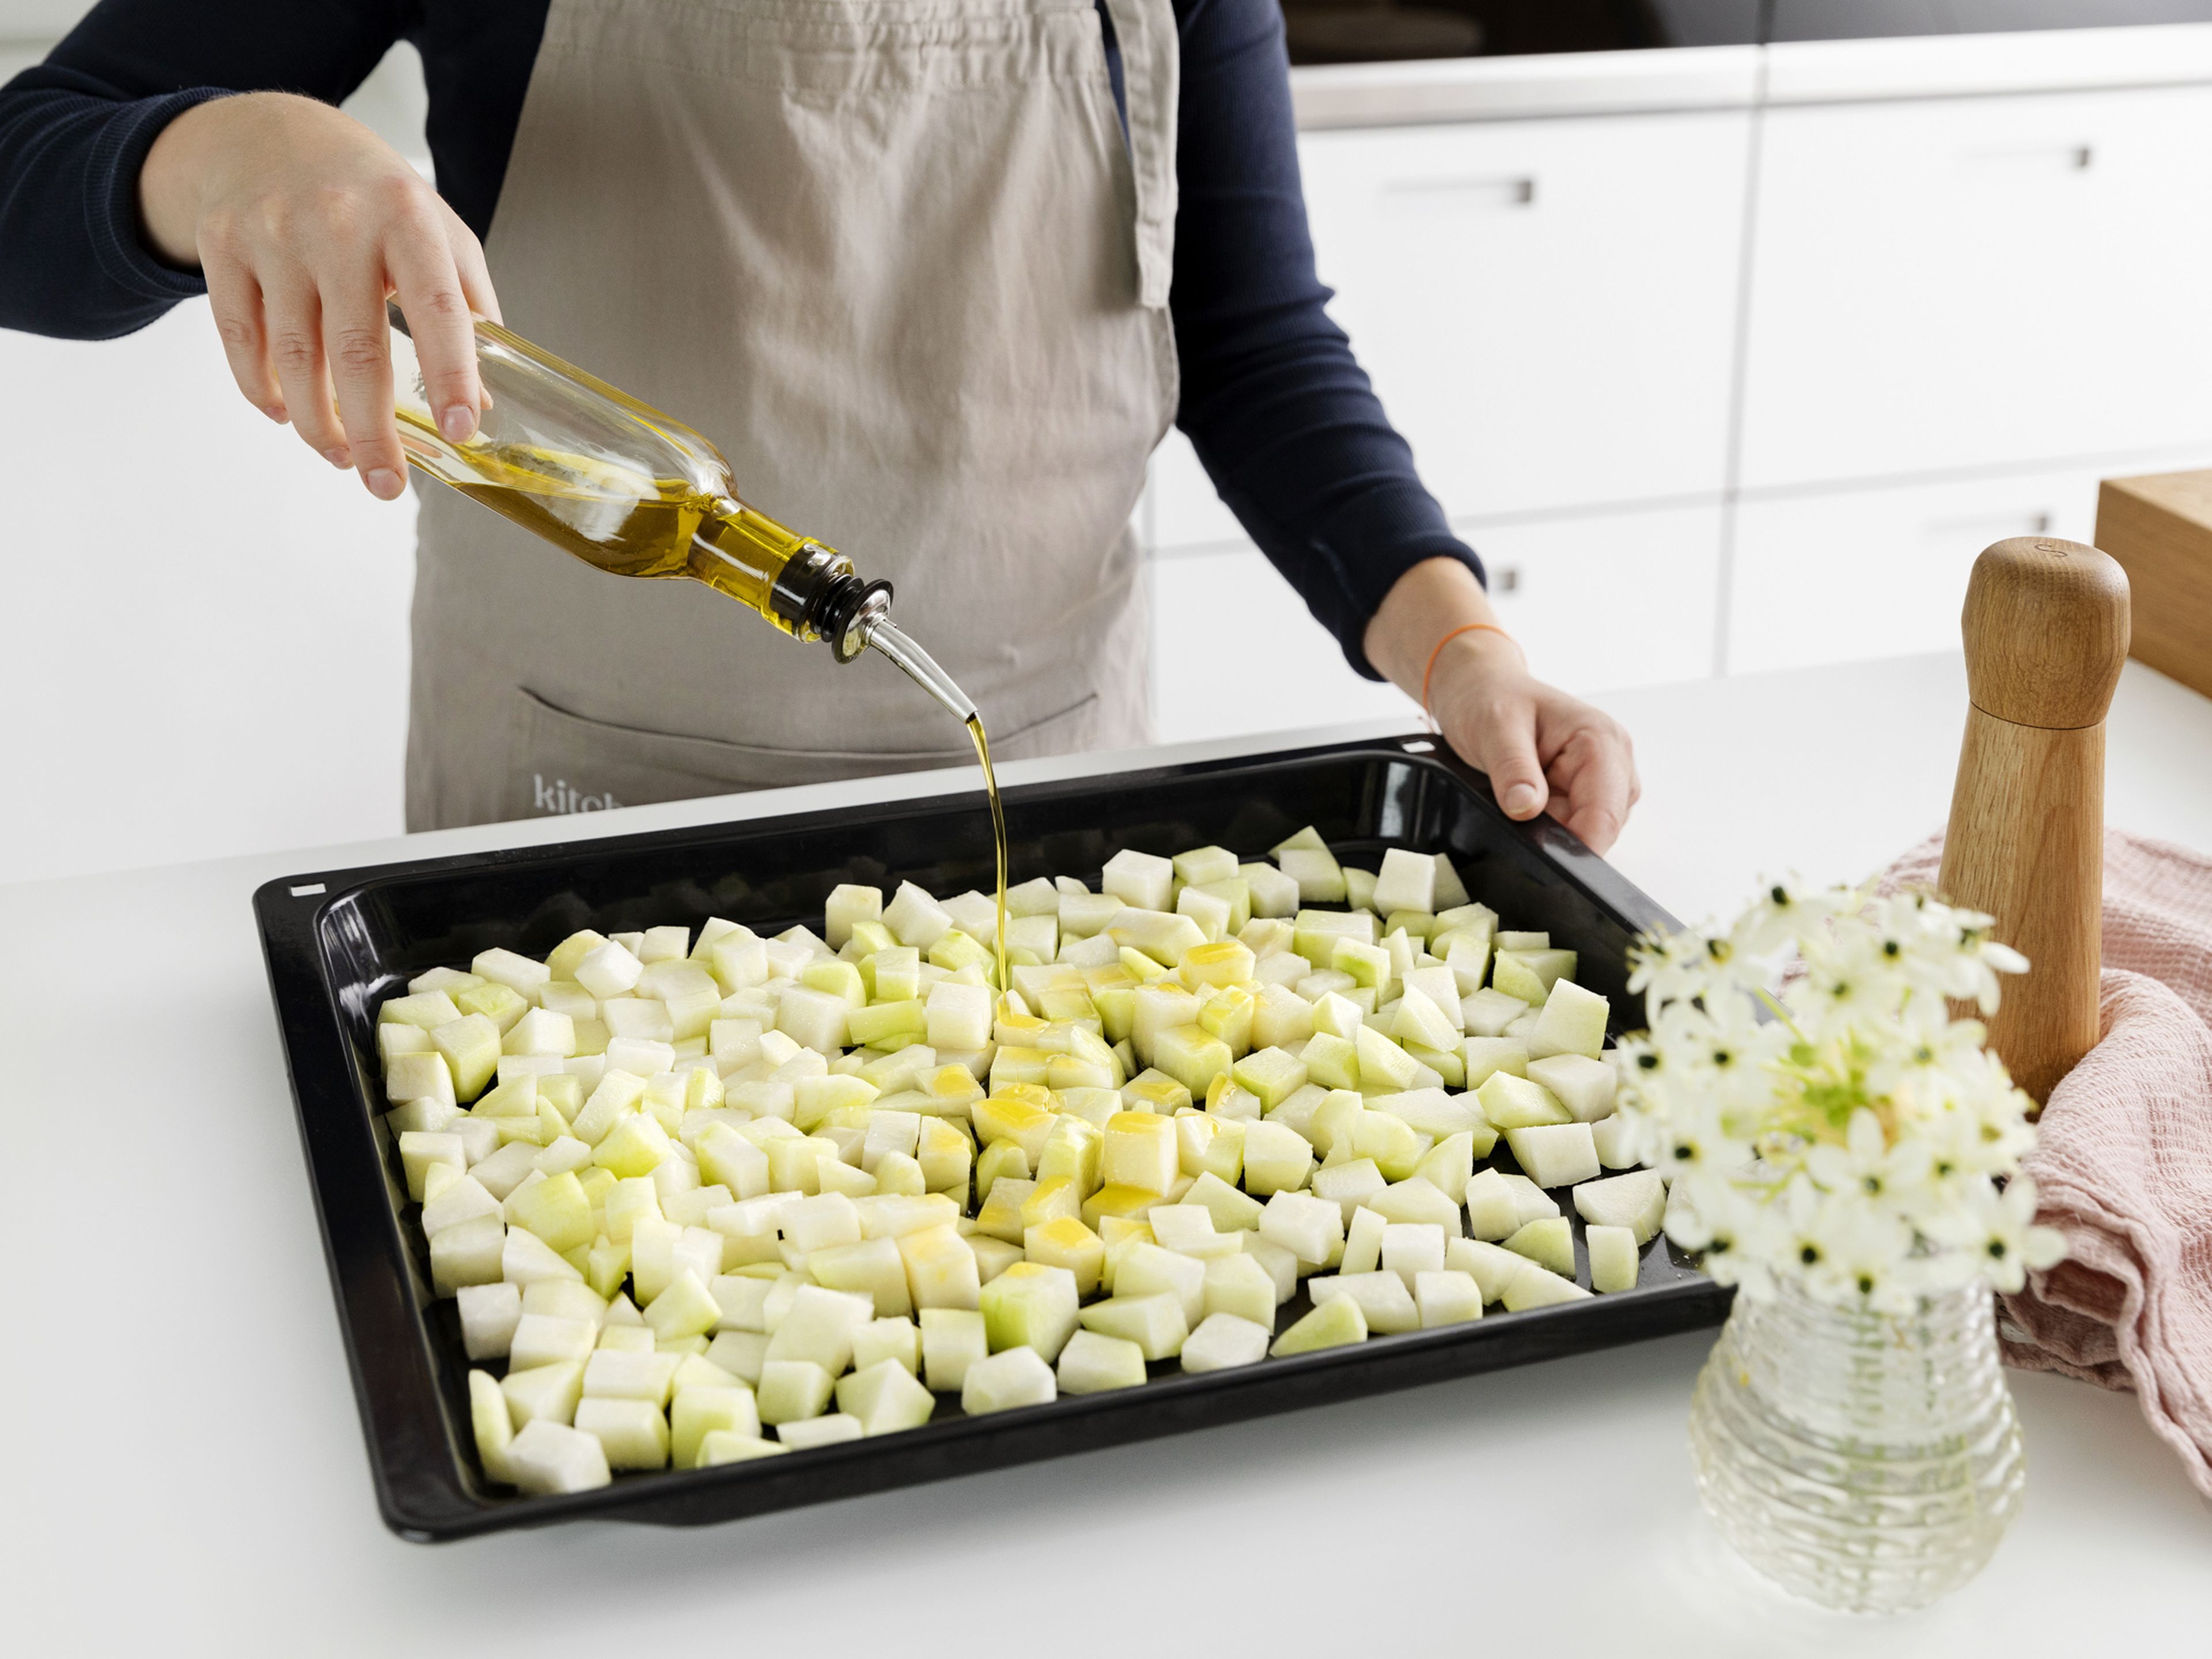 Preheat the oven to 200°C/390°F.  Zest orange and set aside for garnishing. Juice the orange. Dice onion and mince garlic. Peel and chop kohlrabi into 2-cm/0.5-in cubes. Transfer kohlrabi to a baking sheet and toss with half the olive oil, salt, and pepper. Let roast for approx. 12 min., or until well browned.